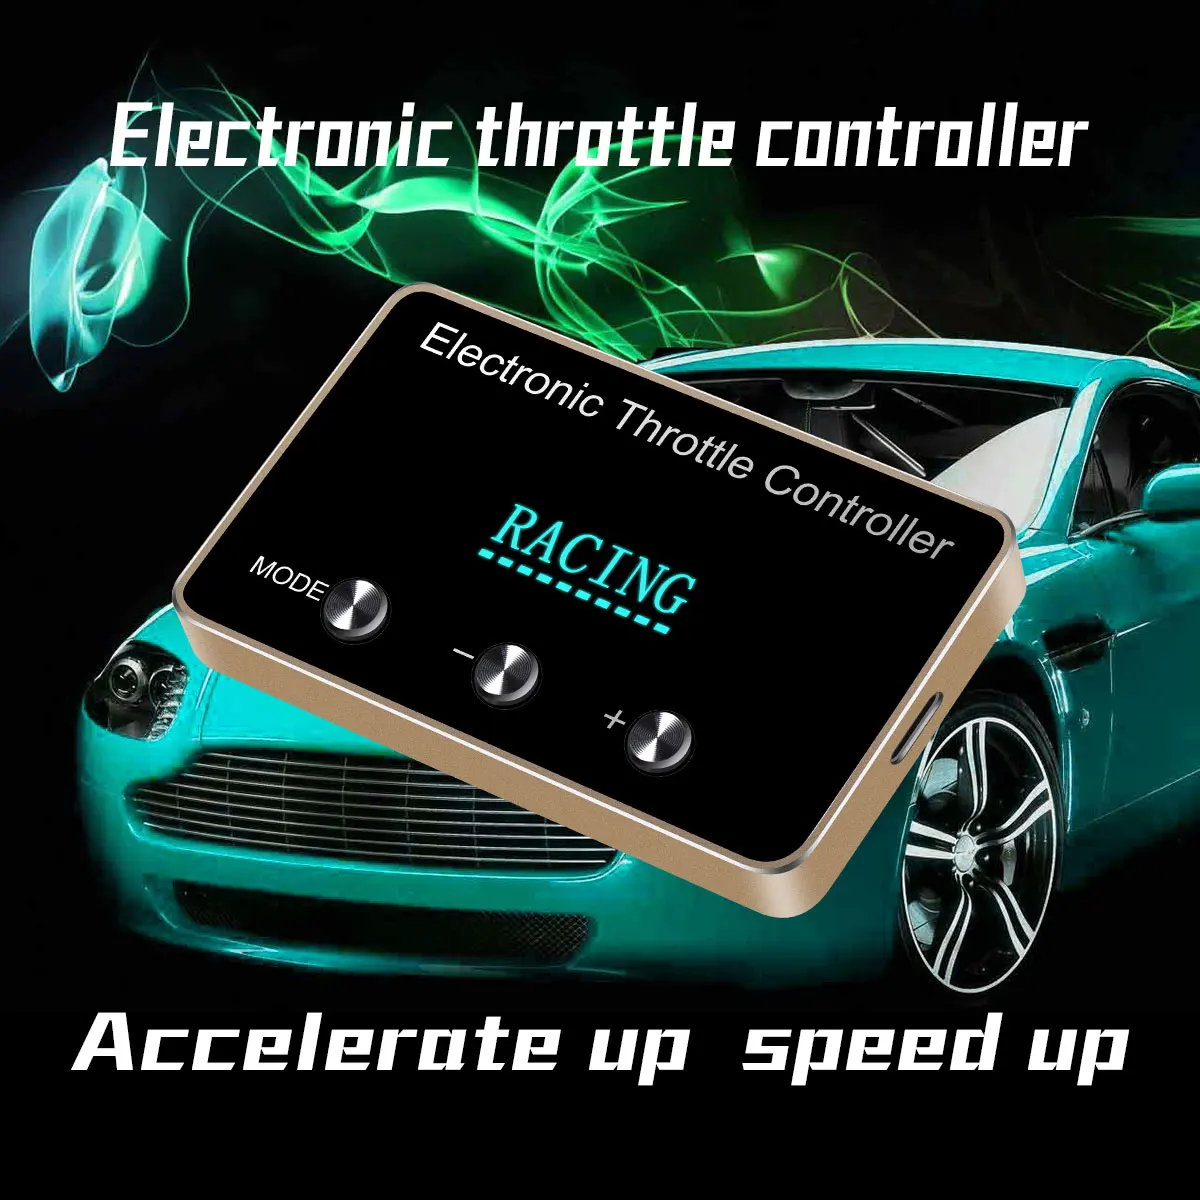 

LCD Electronic Throttle Controller Sprint Booster Fuel Pedal Commander Chip Tuning 10 Drive Modes Racing for GMC Yukon 2007+